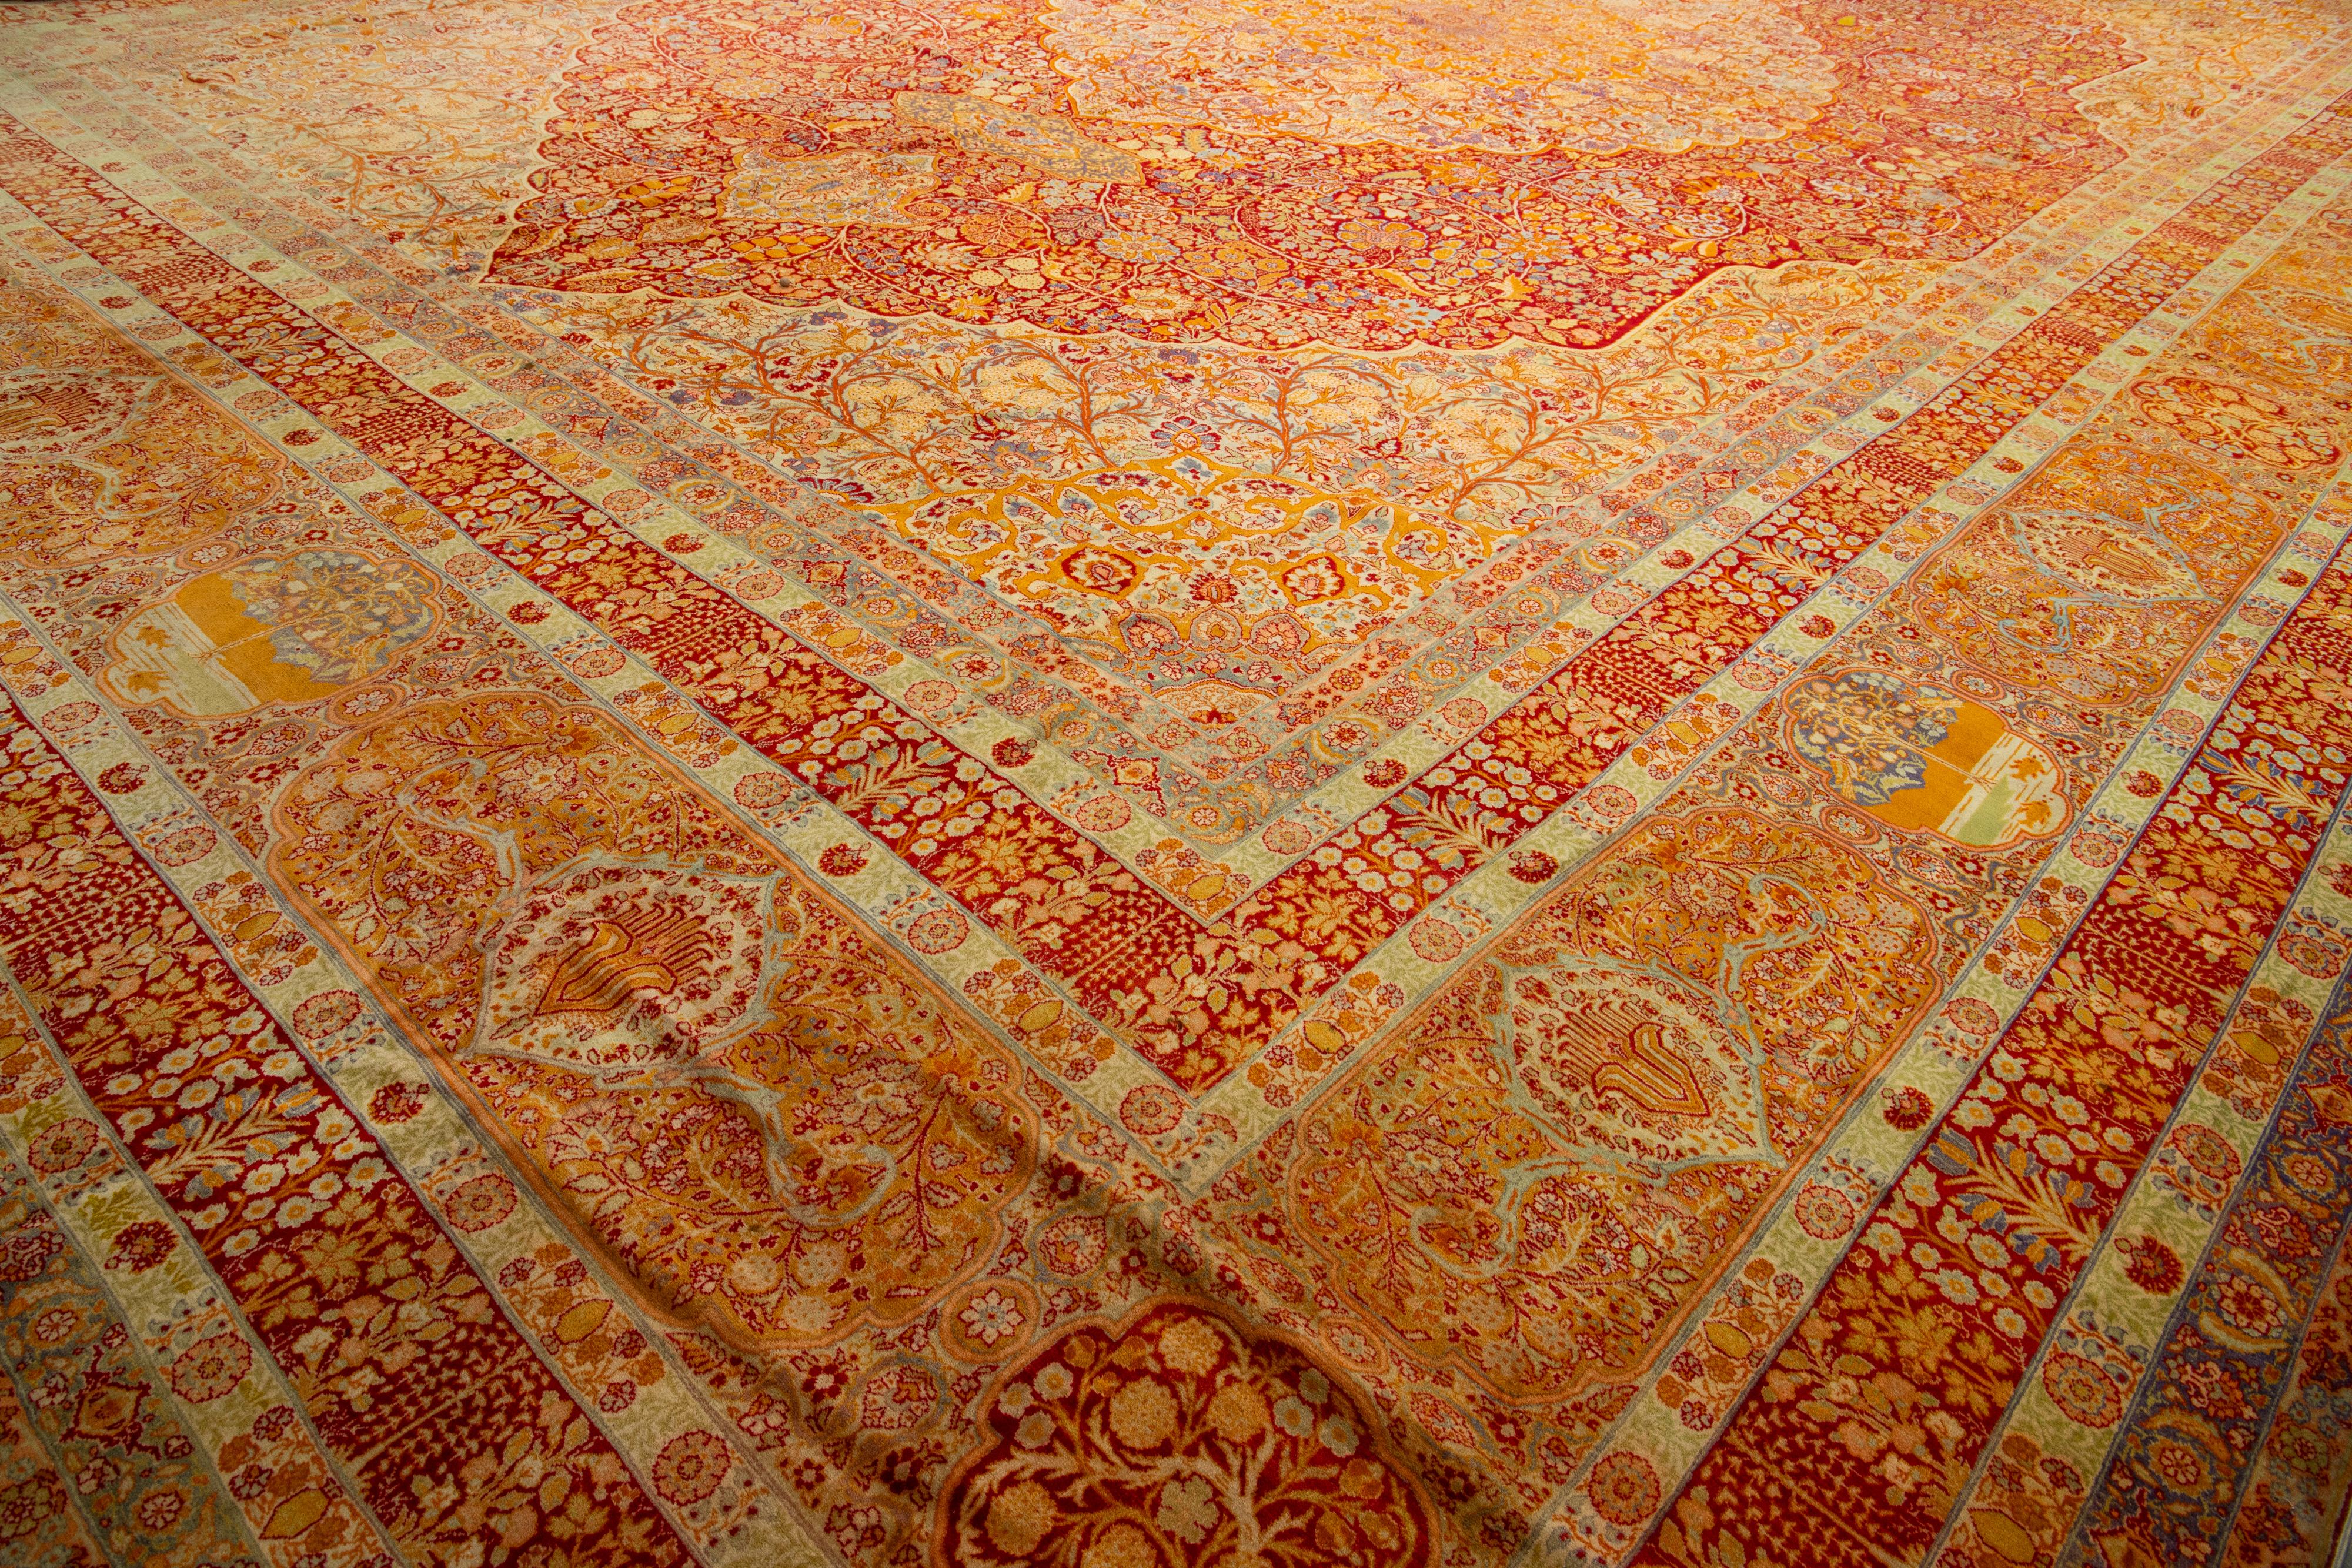 20th Century One Of The Kind 1900s Persian Tabriz Wool Rug Oversize with Rosette Motif In Red For Sale